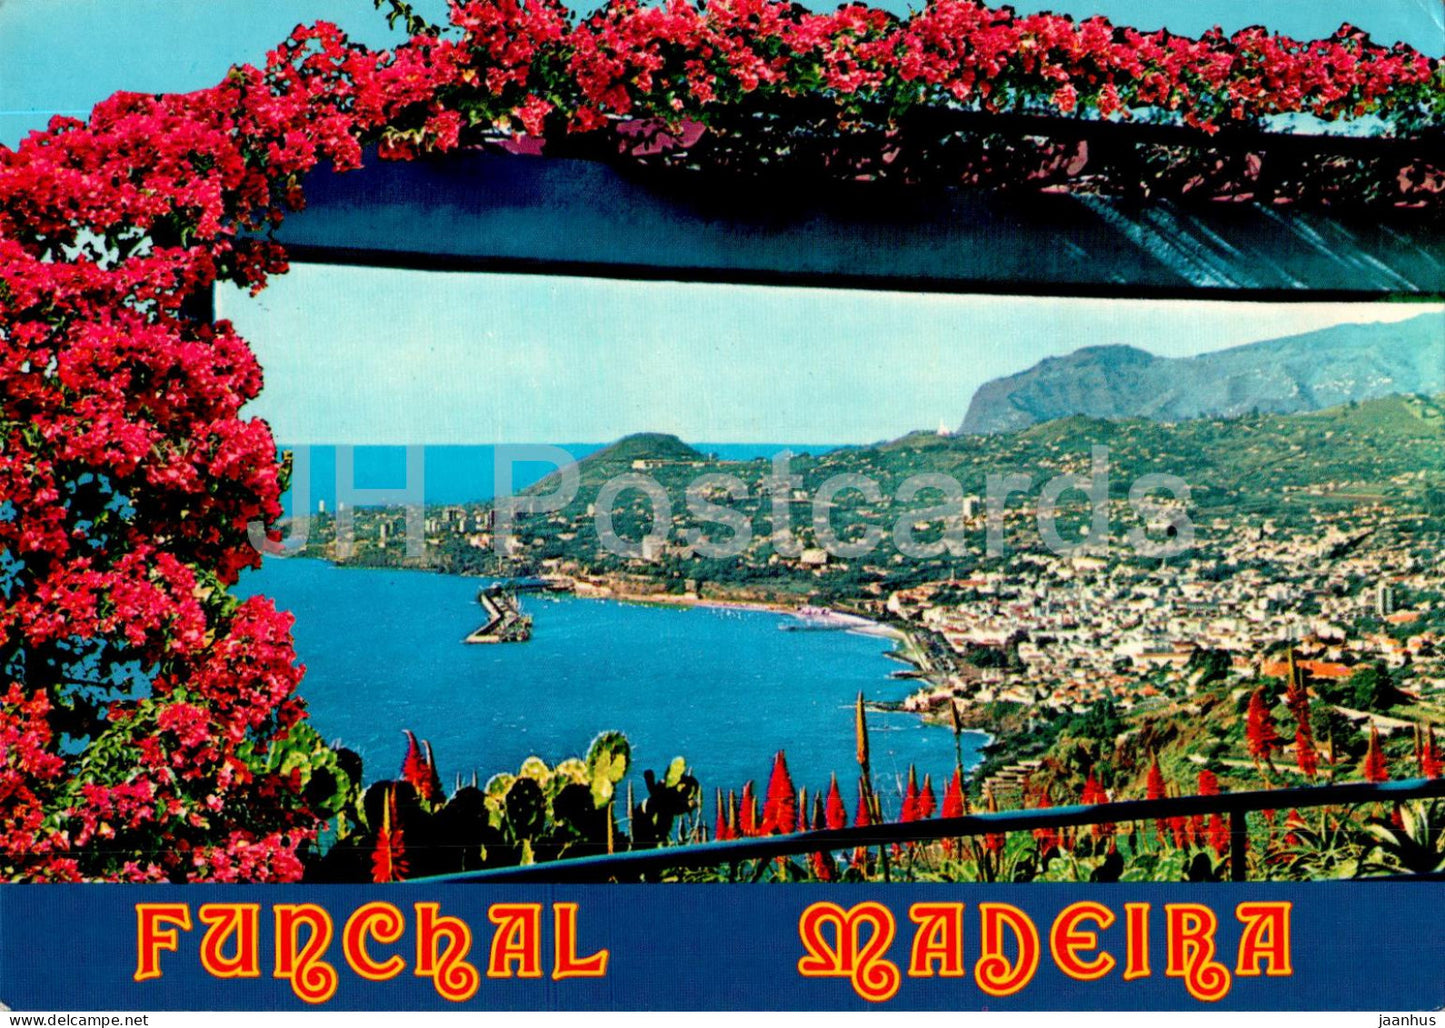 Funchal Madeira - western view - 195/55 - Portugal - unused - JH Postcards